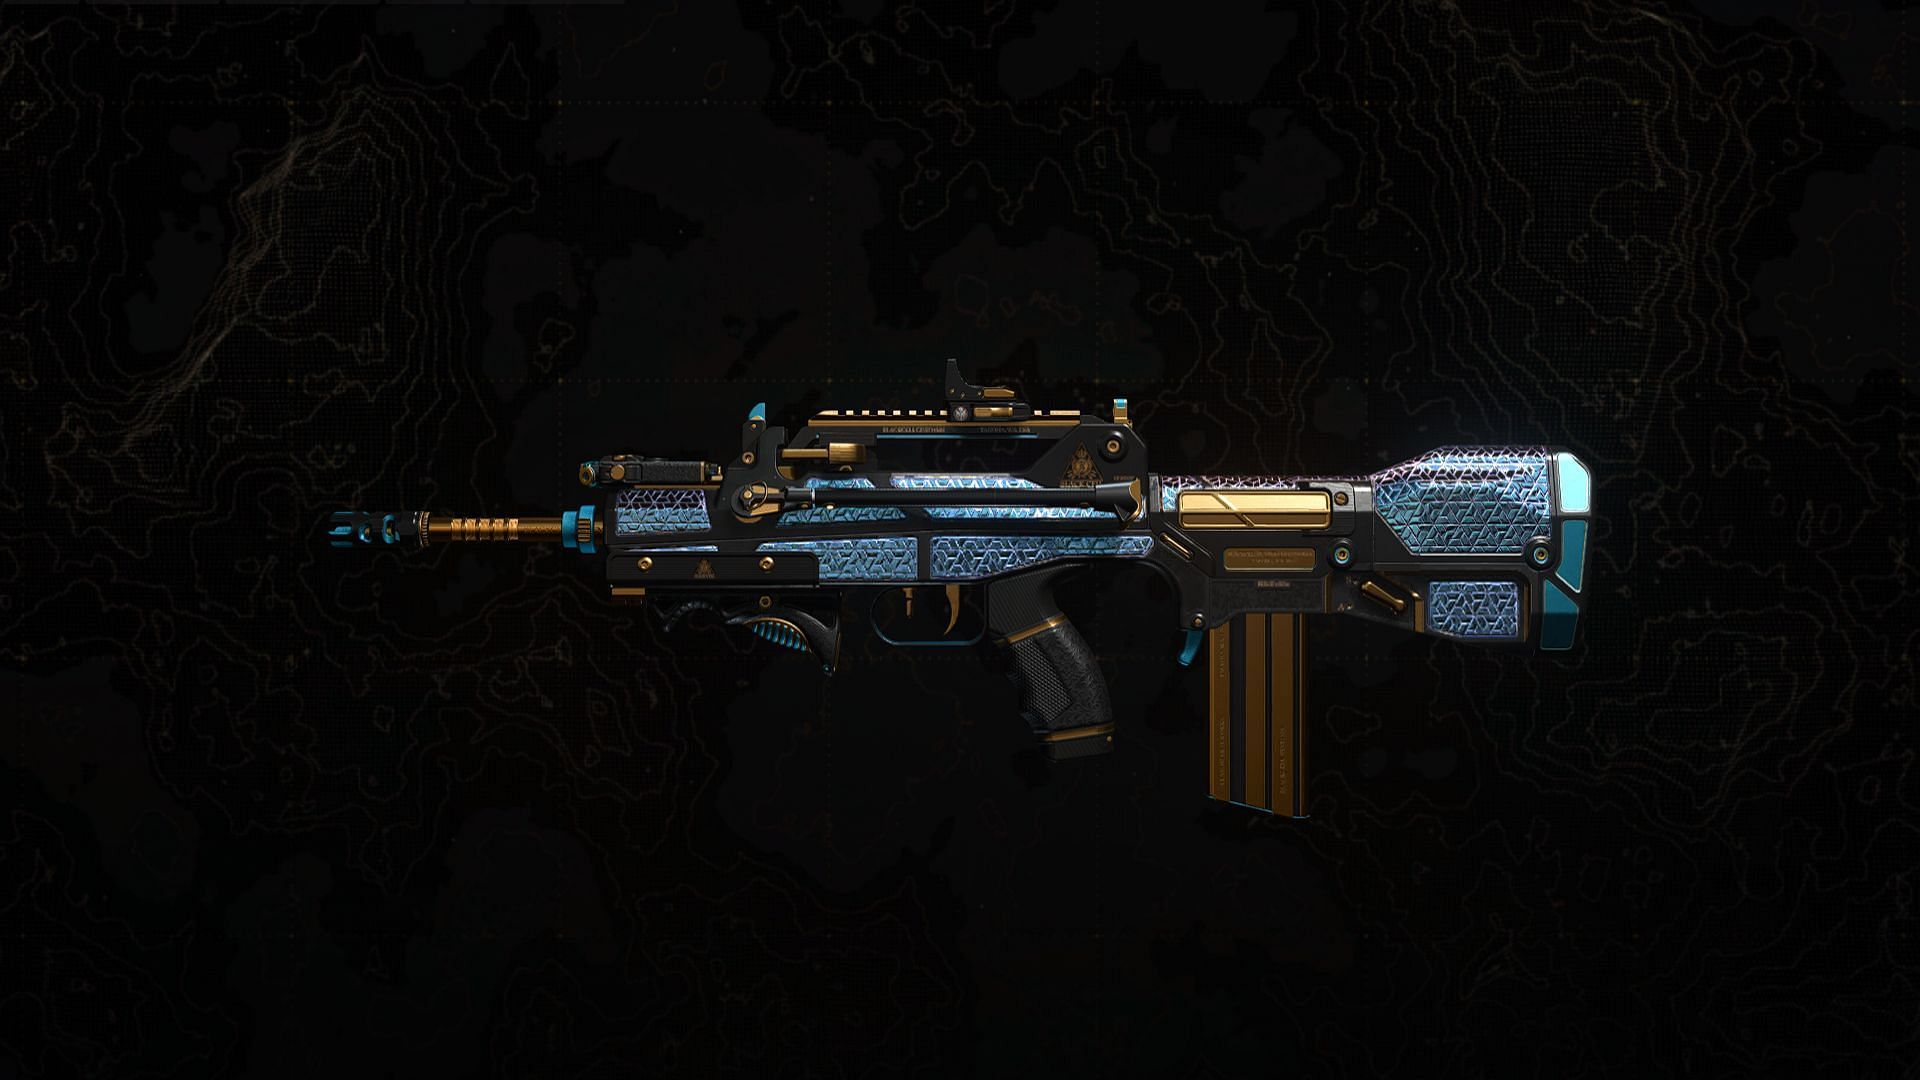 An FR Avancer with a dark background highlighting the weapon.